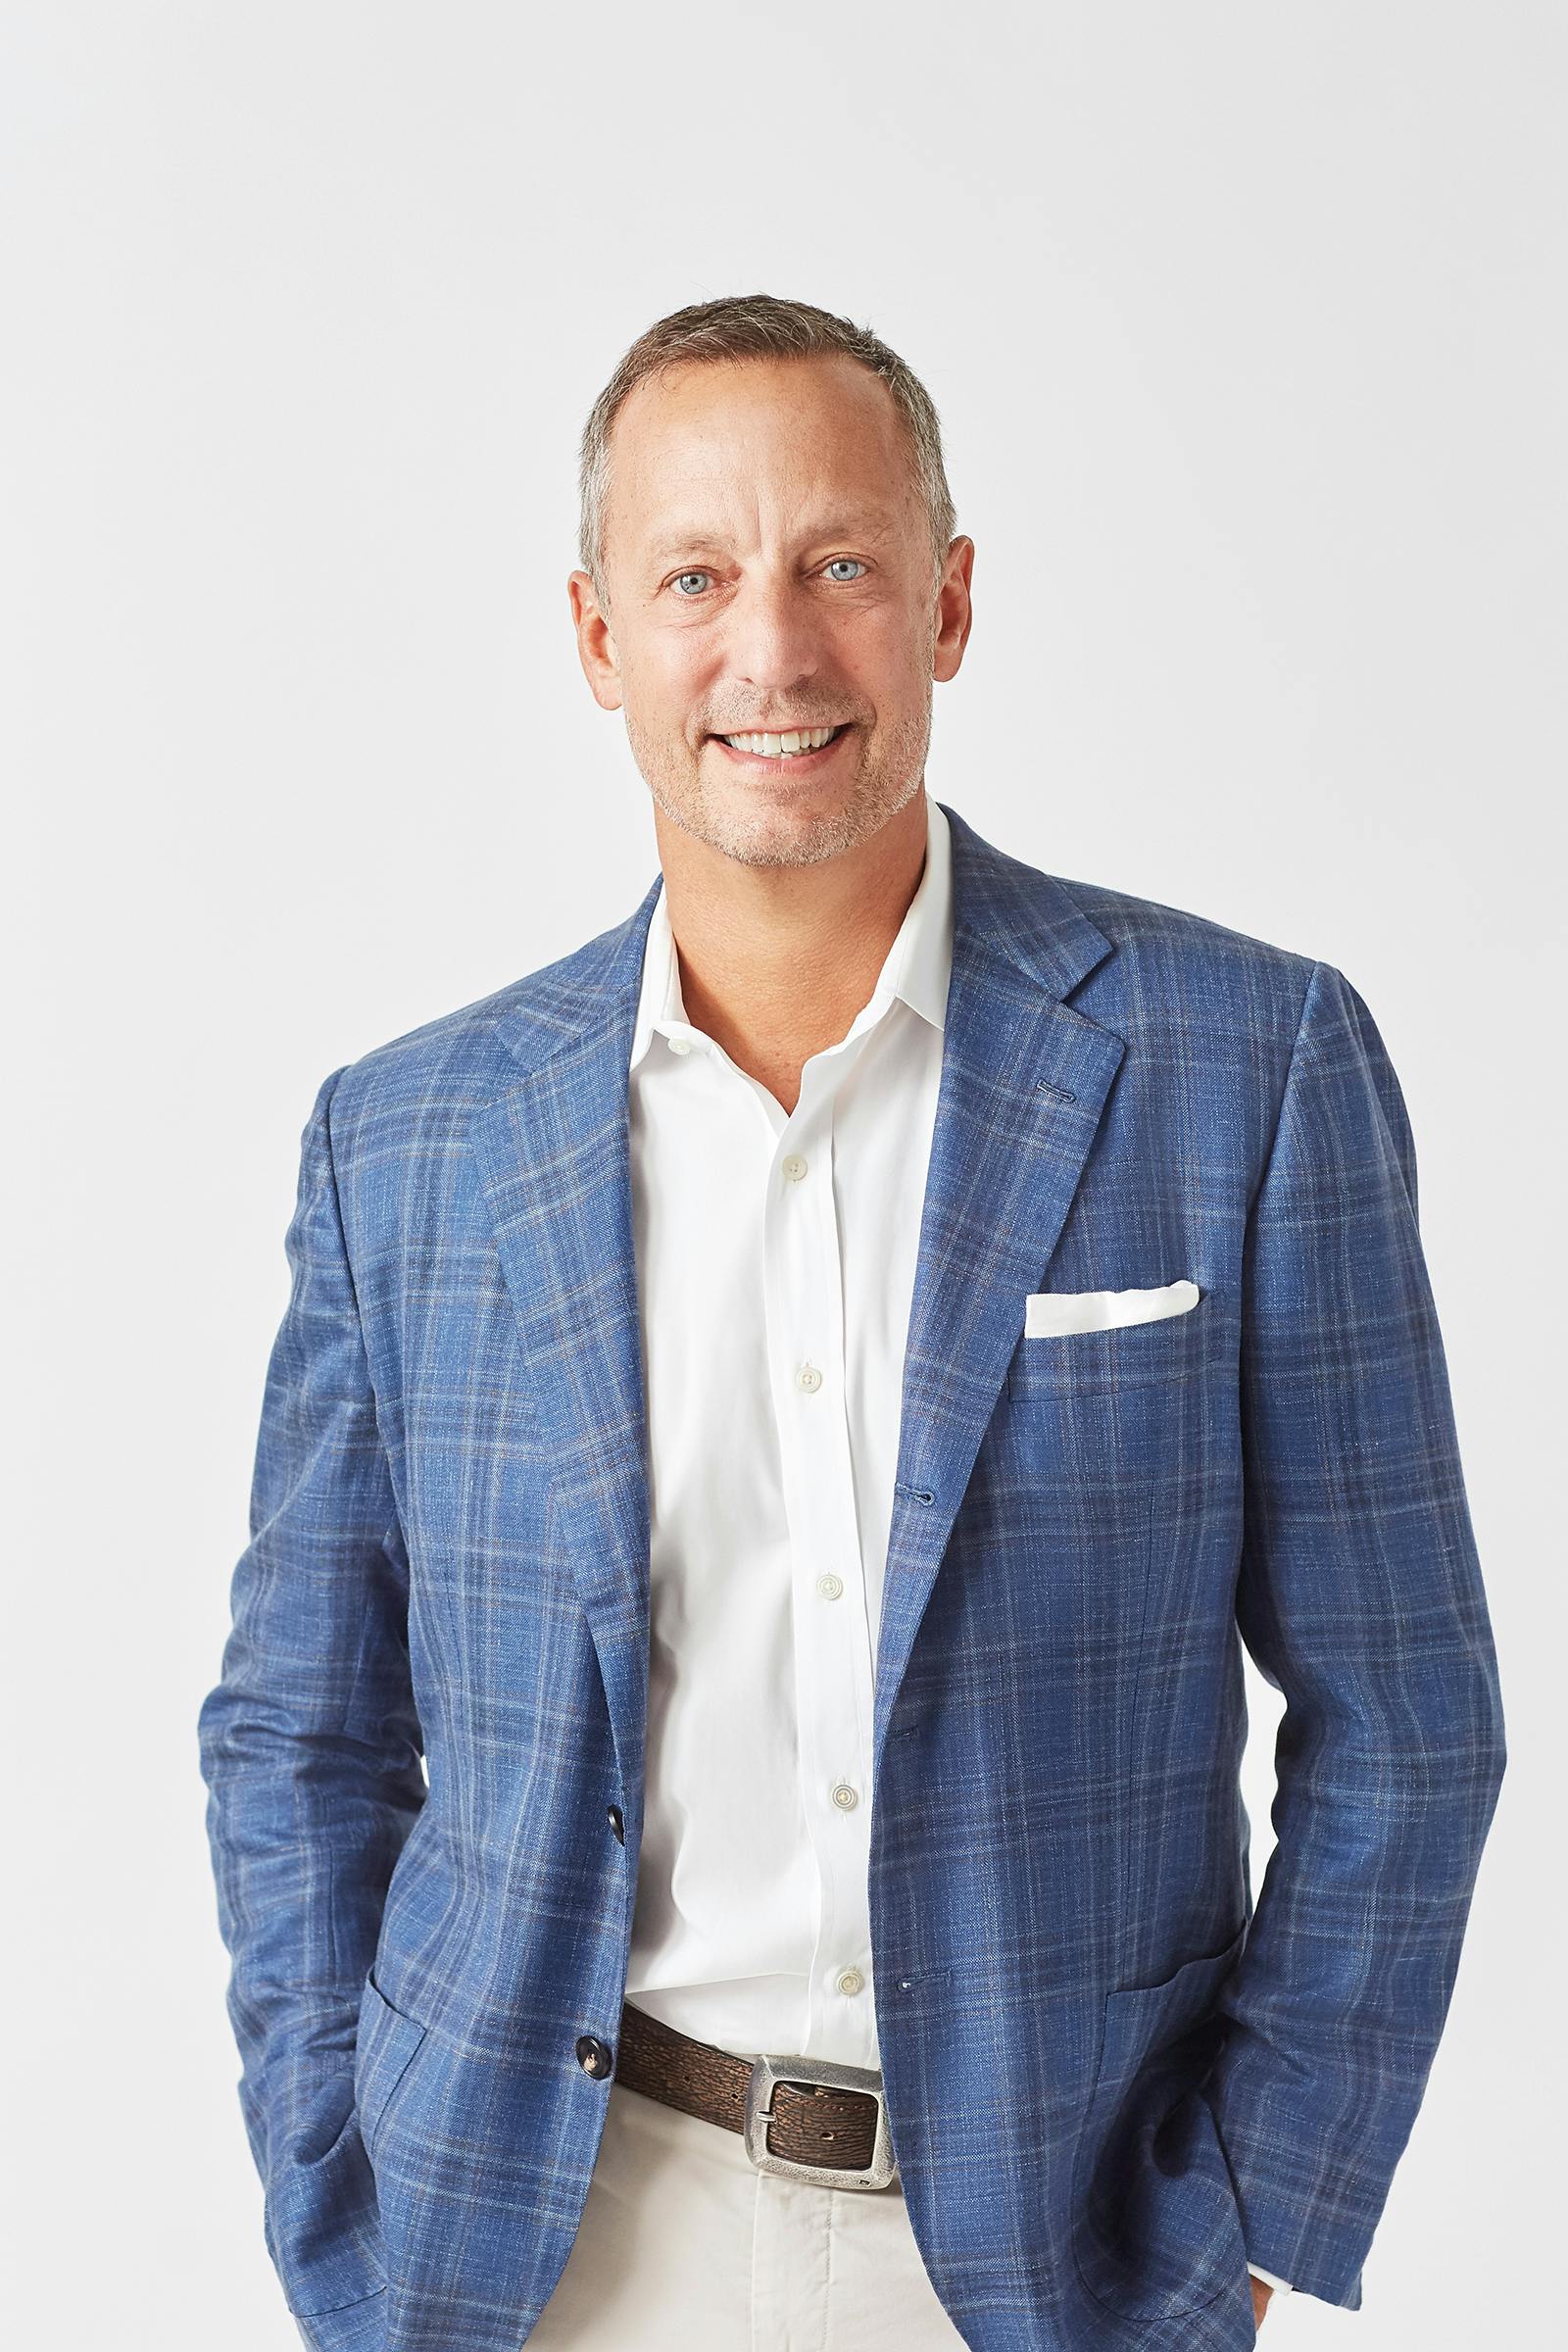 Mike Dodson, Chief Revenue Officer